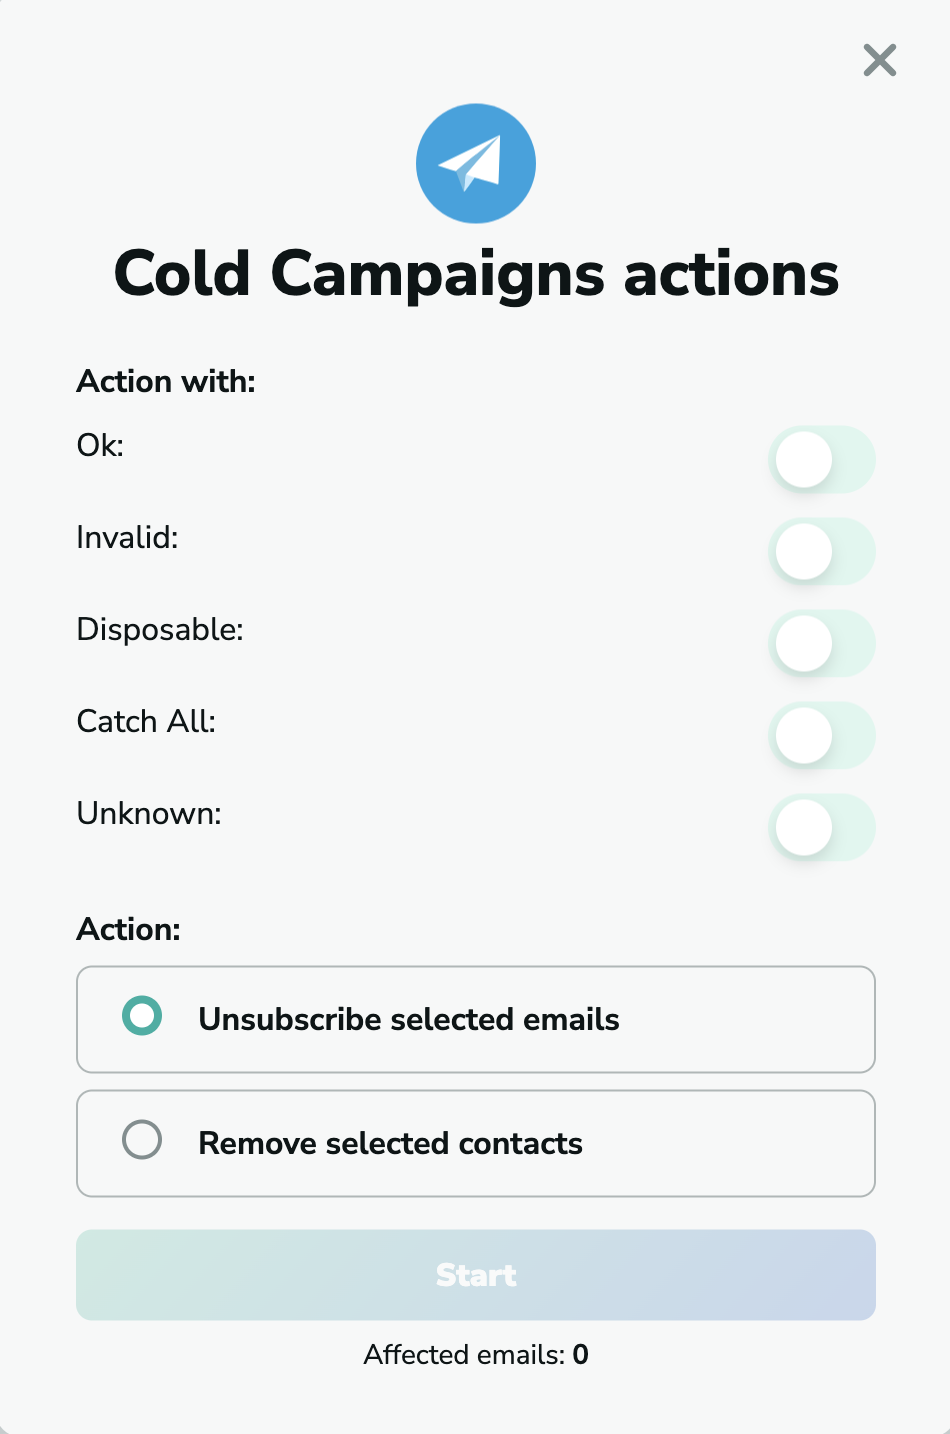 Cold Campaigns actions in MillionVerifier